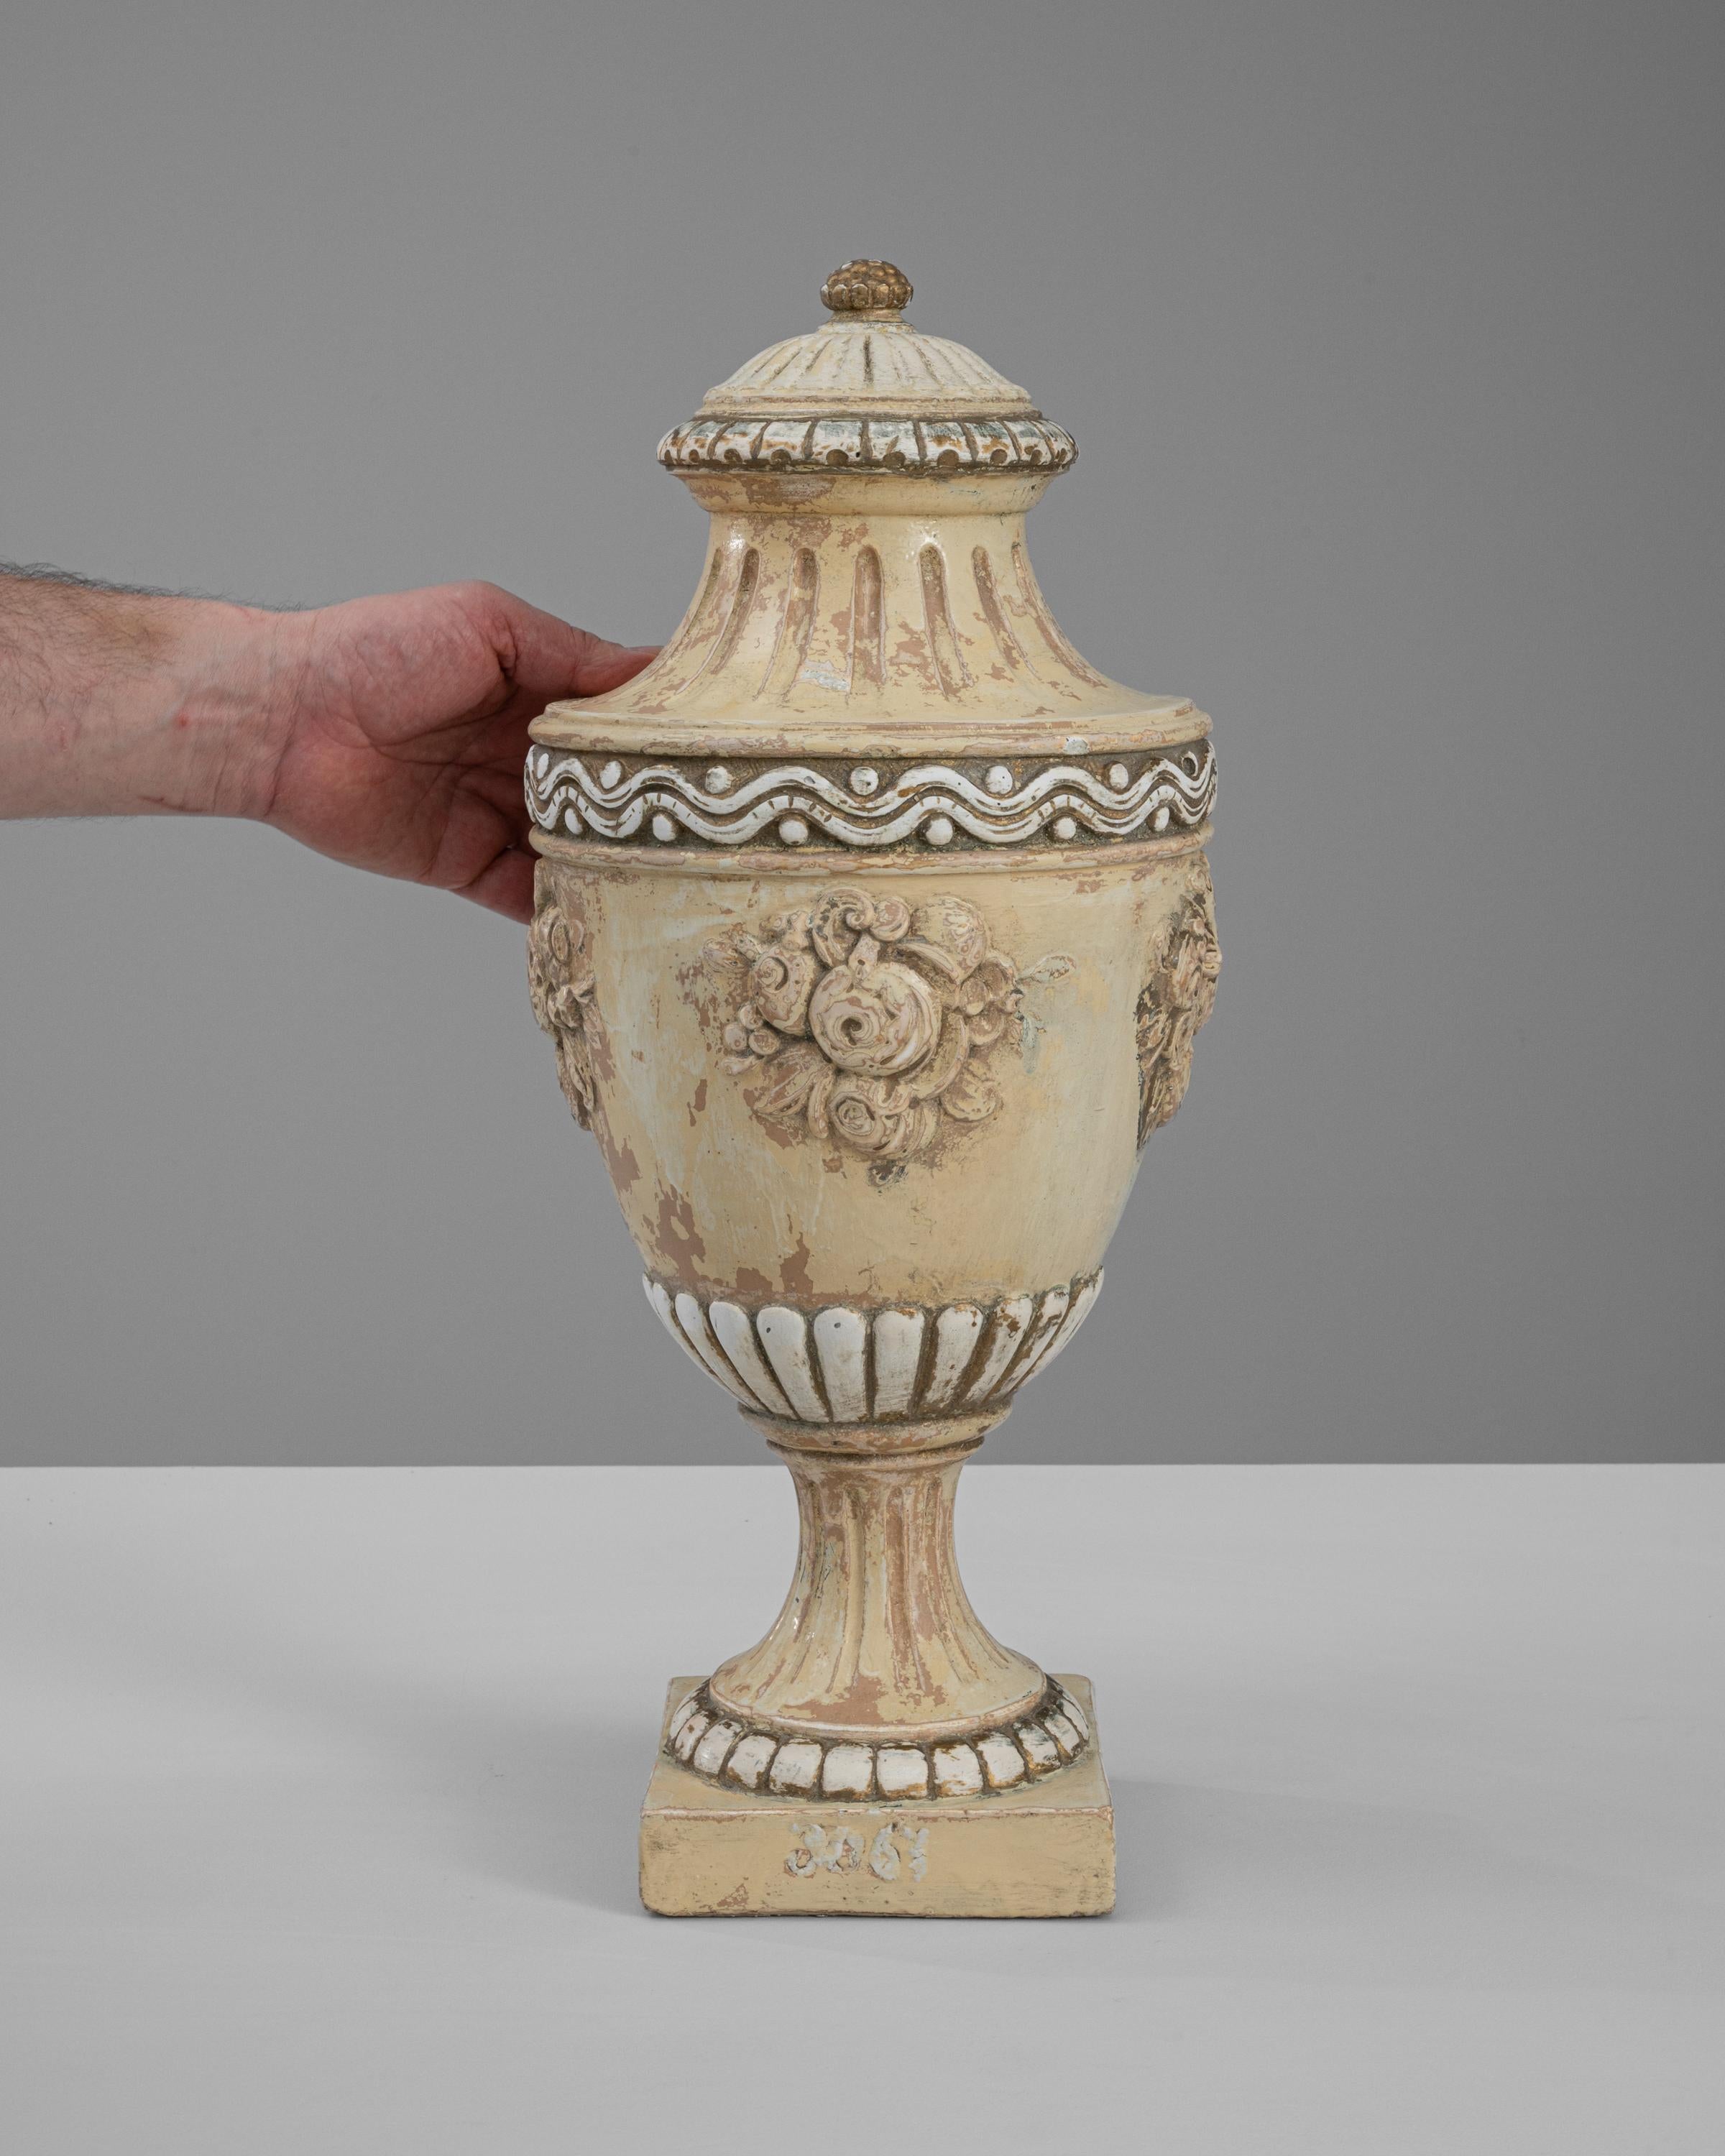 This exquisite 19th Century French Ceramic Urn is a splendid example of classic decorative art, perfect for adding an elegant touch to any setting. The urn features ornate floral motifs and intricate detailing around the base and lid, which are